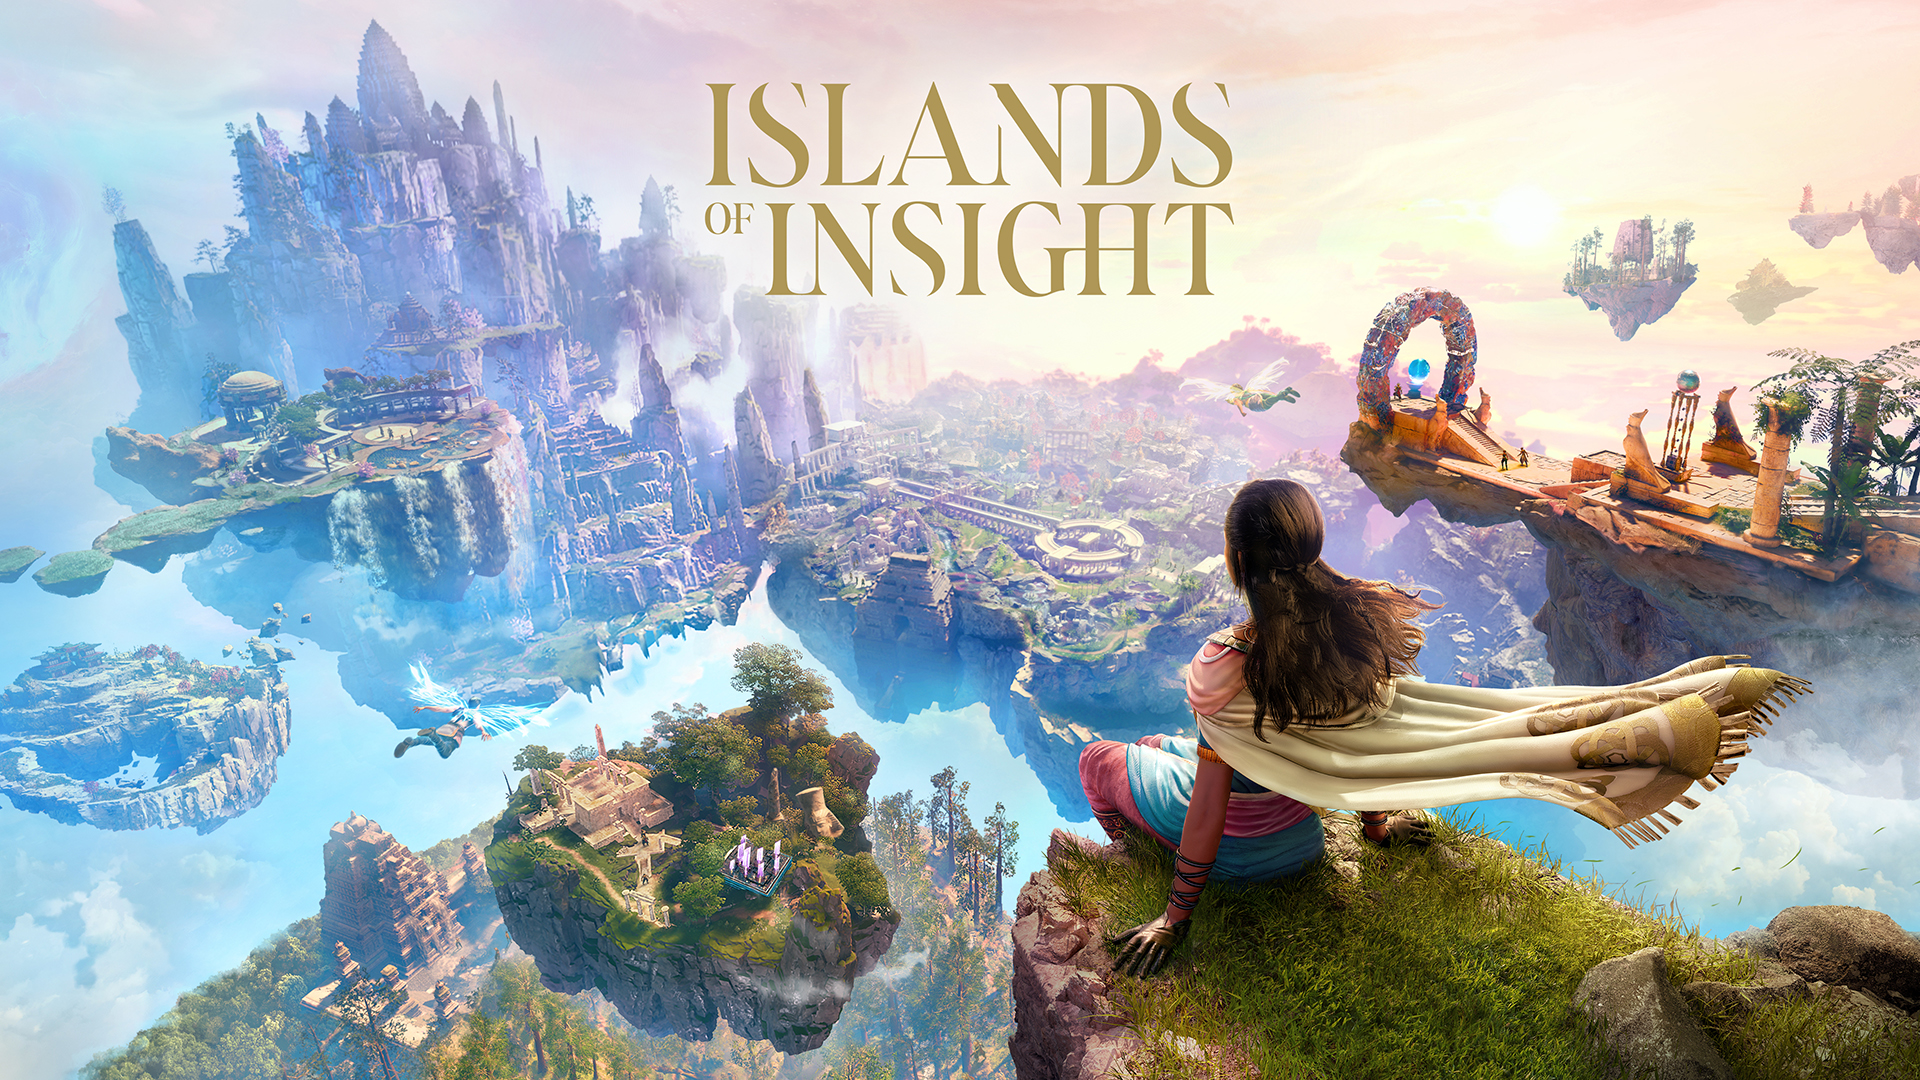 The key art for Islands of Insight. A person with brown hair sits atop a cliff overlooking multiple small floating islands.